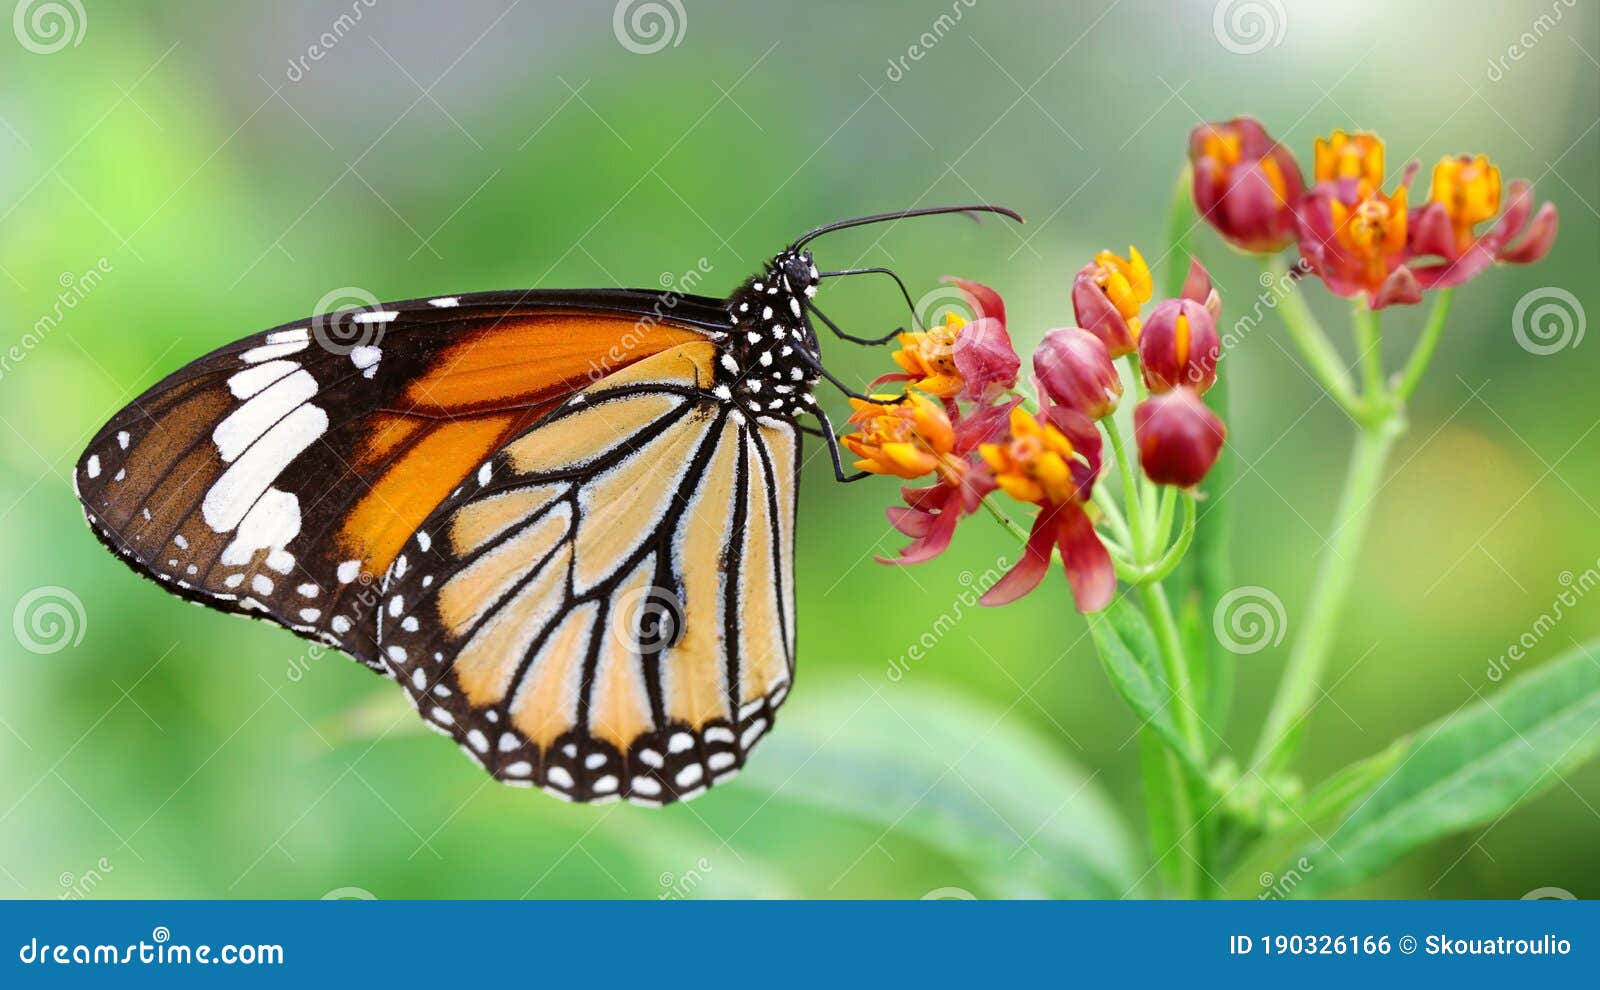 elegant orange monarch butterfly resting on multicolored flowers. macro photography of this gracious and fragile lepidoptera